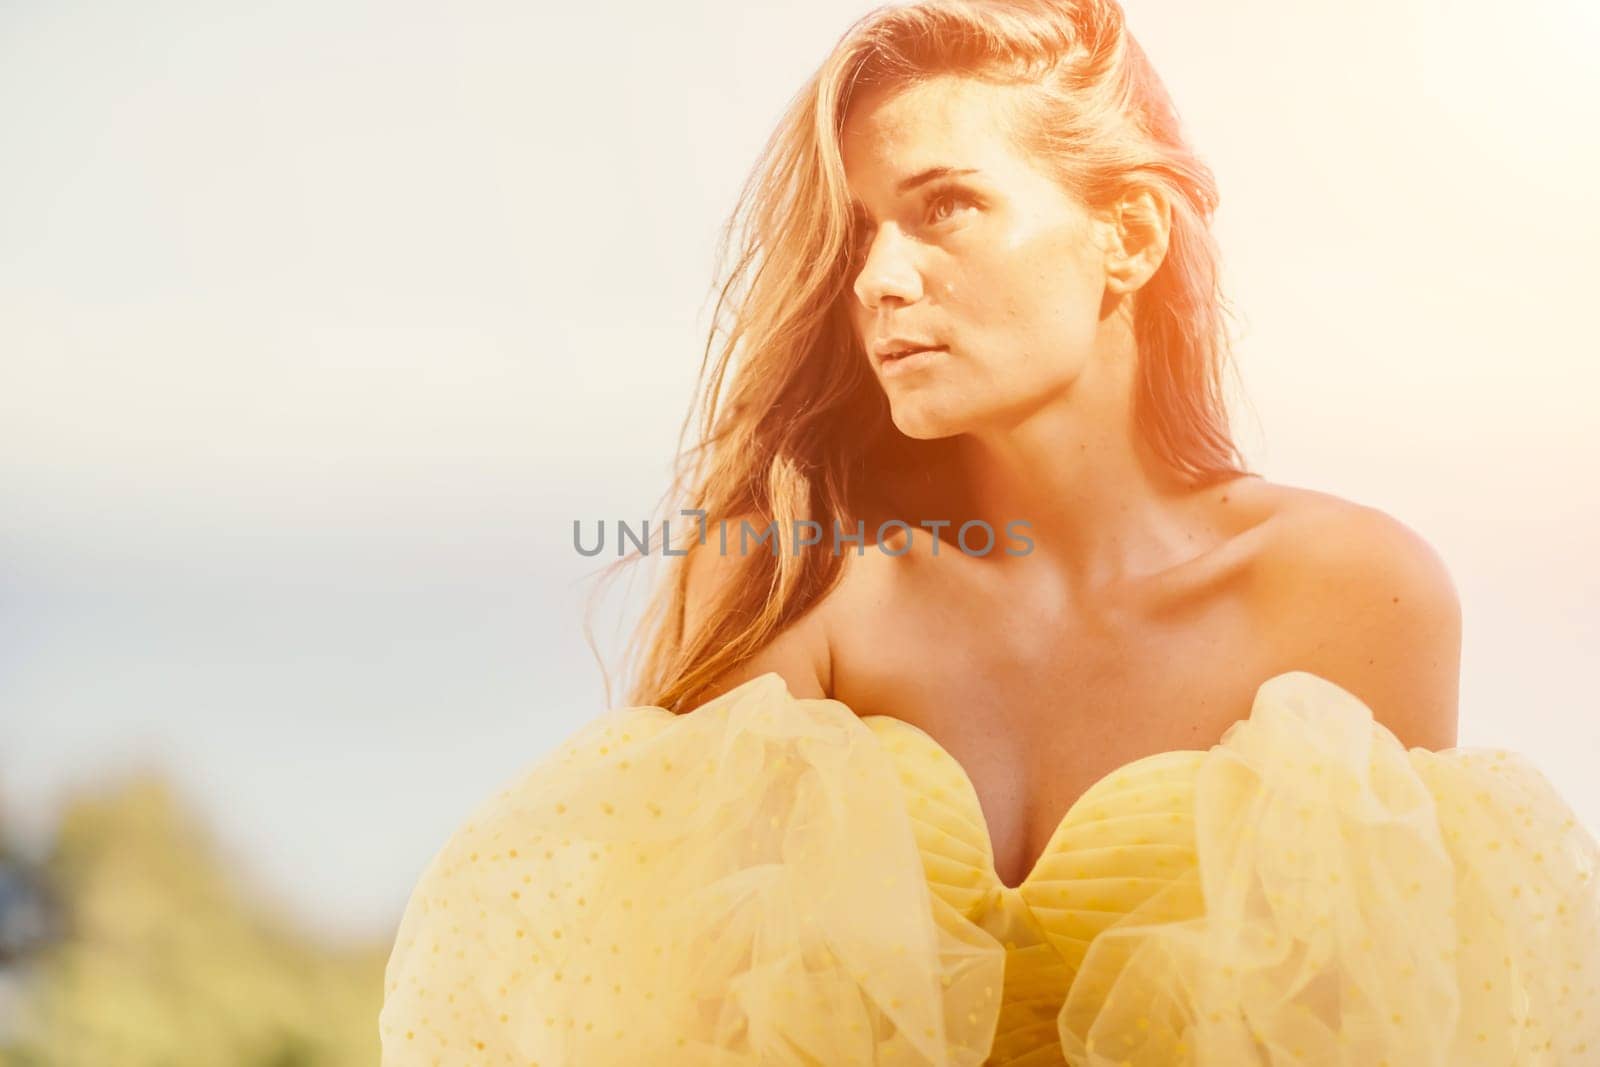 portrait of a beautiful young woman with brown hair in a gorgeous yellow dress looks into the distance